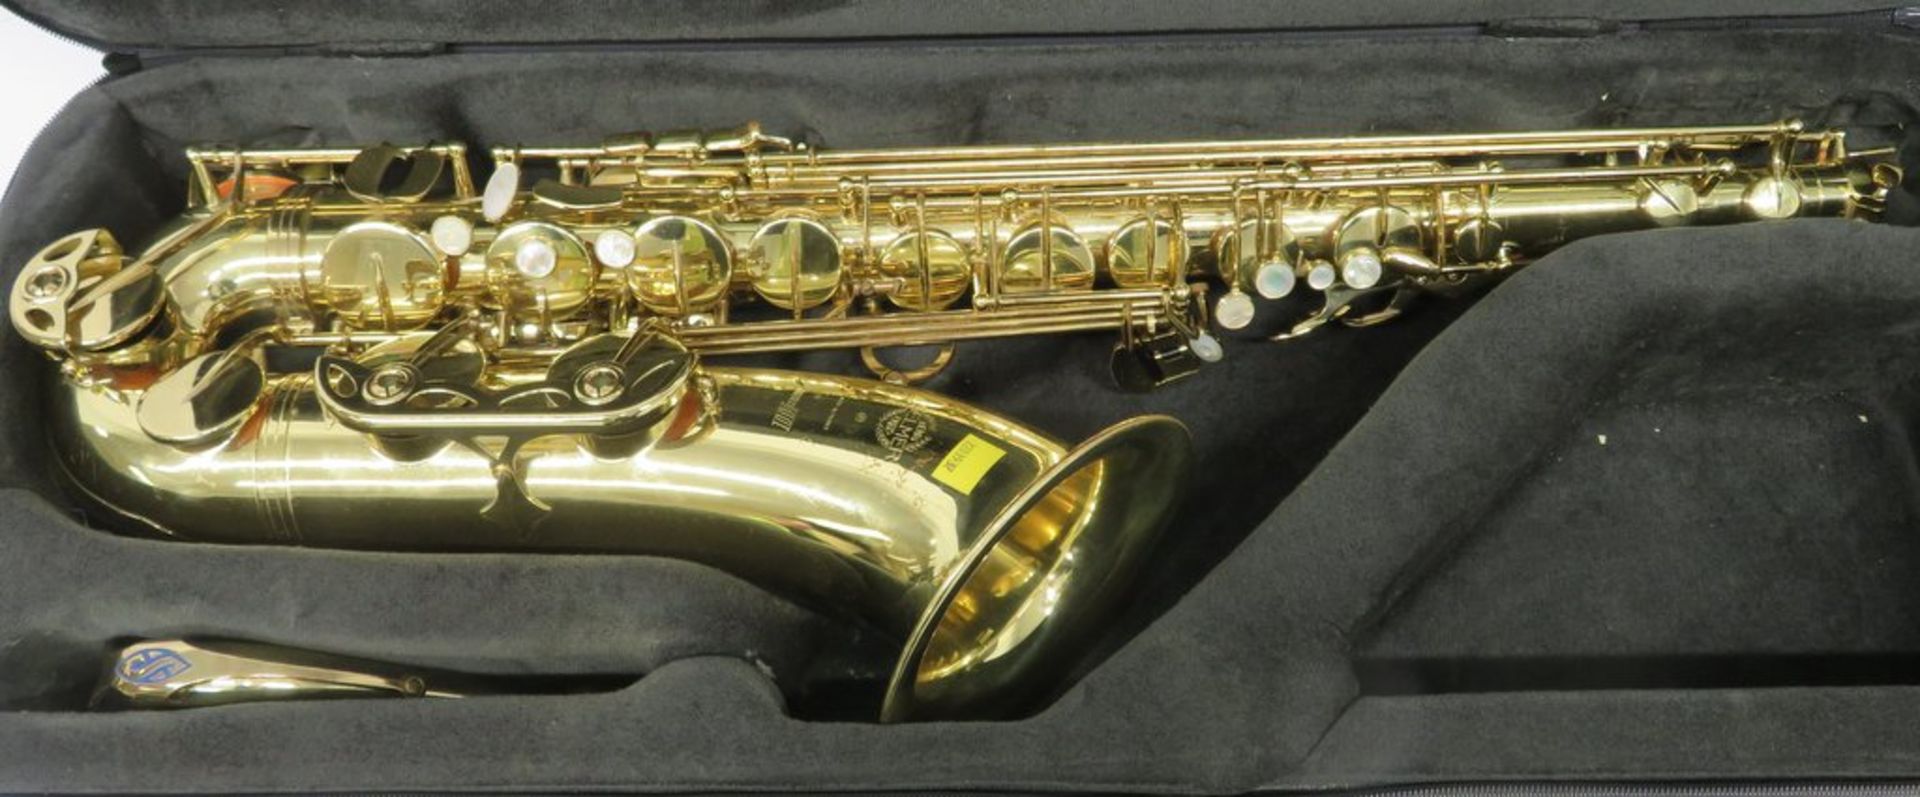 Henri Selmer Super Action 80 Serie 3 Tenor Saxophone With Case. Serial Number: N.643778. - Image 2 of 18